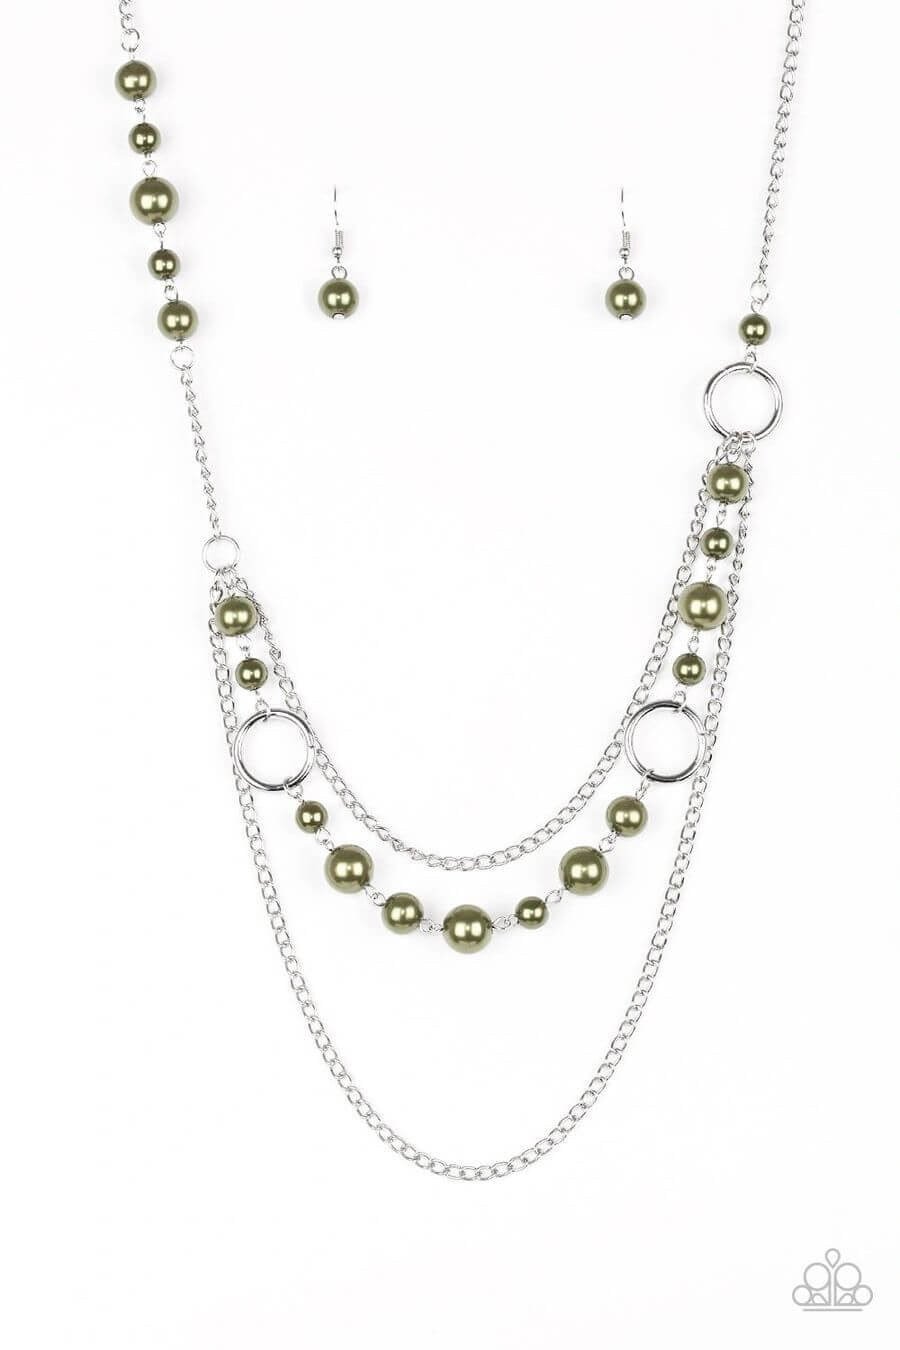 Paparazzi “Party Dress Princess” Pearly Olive Green Bead Necklace